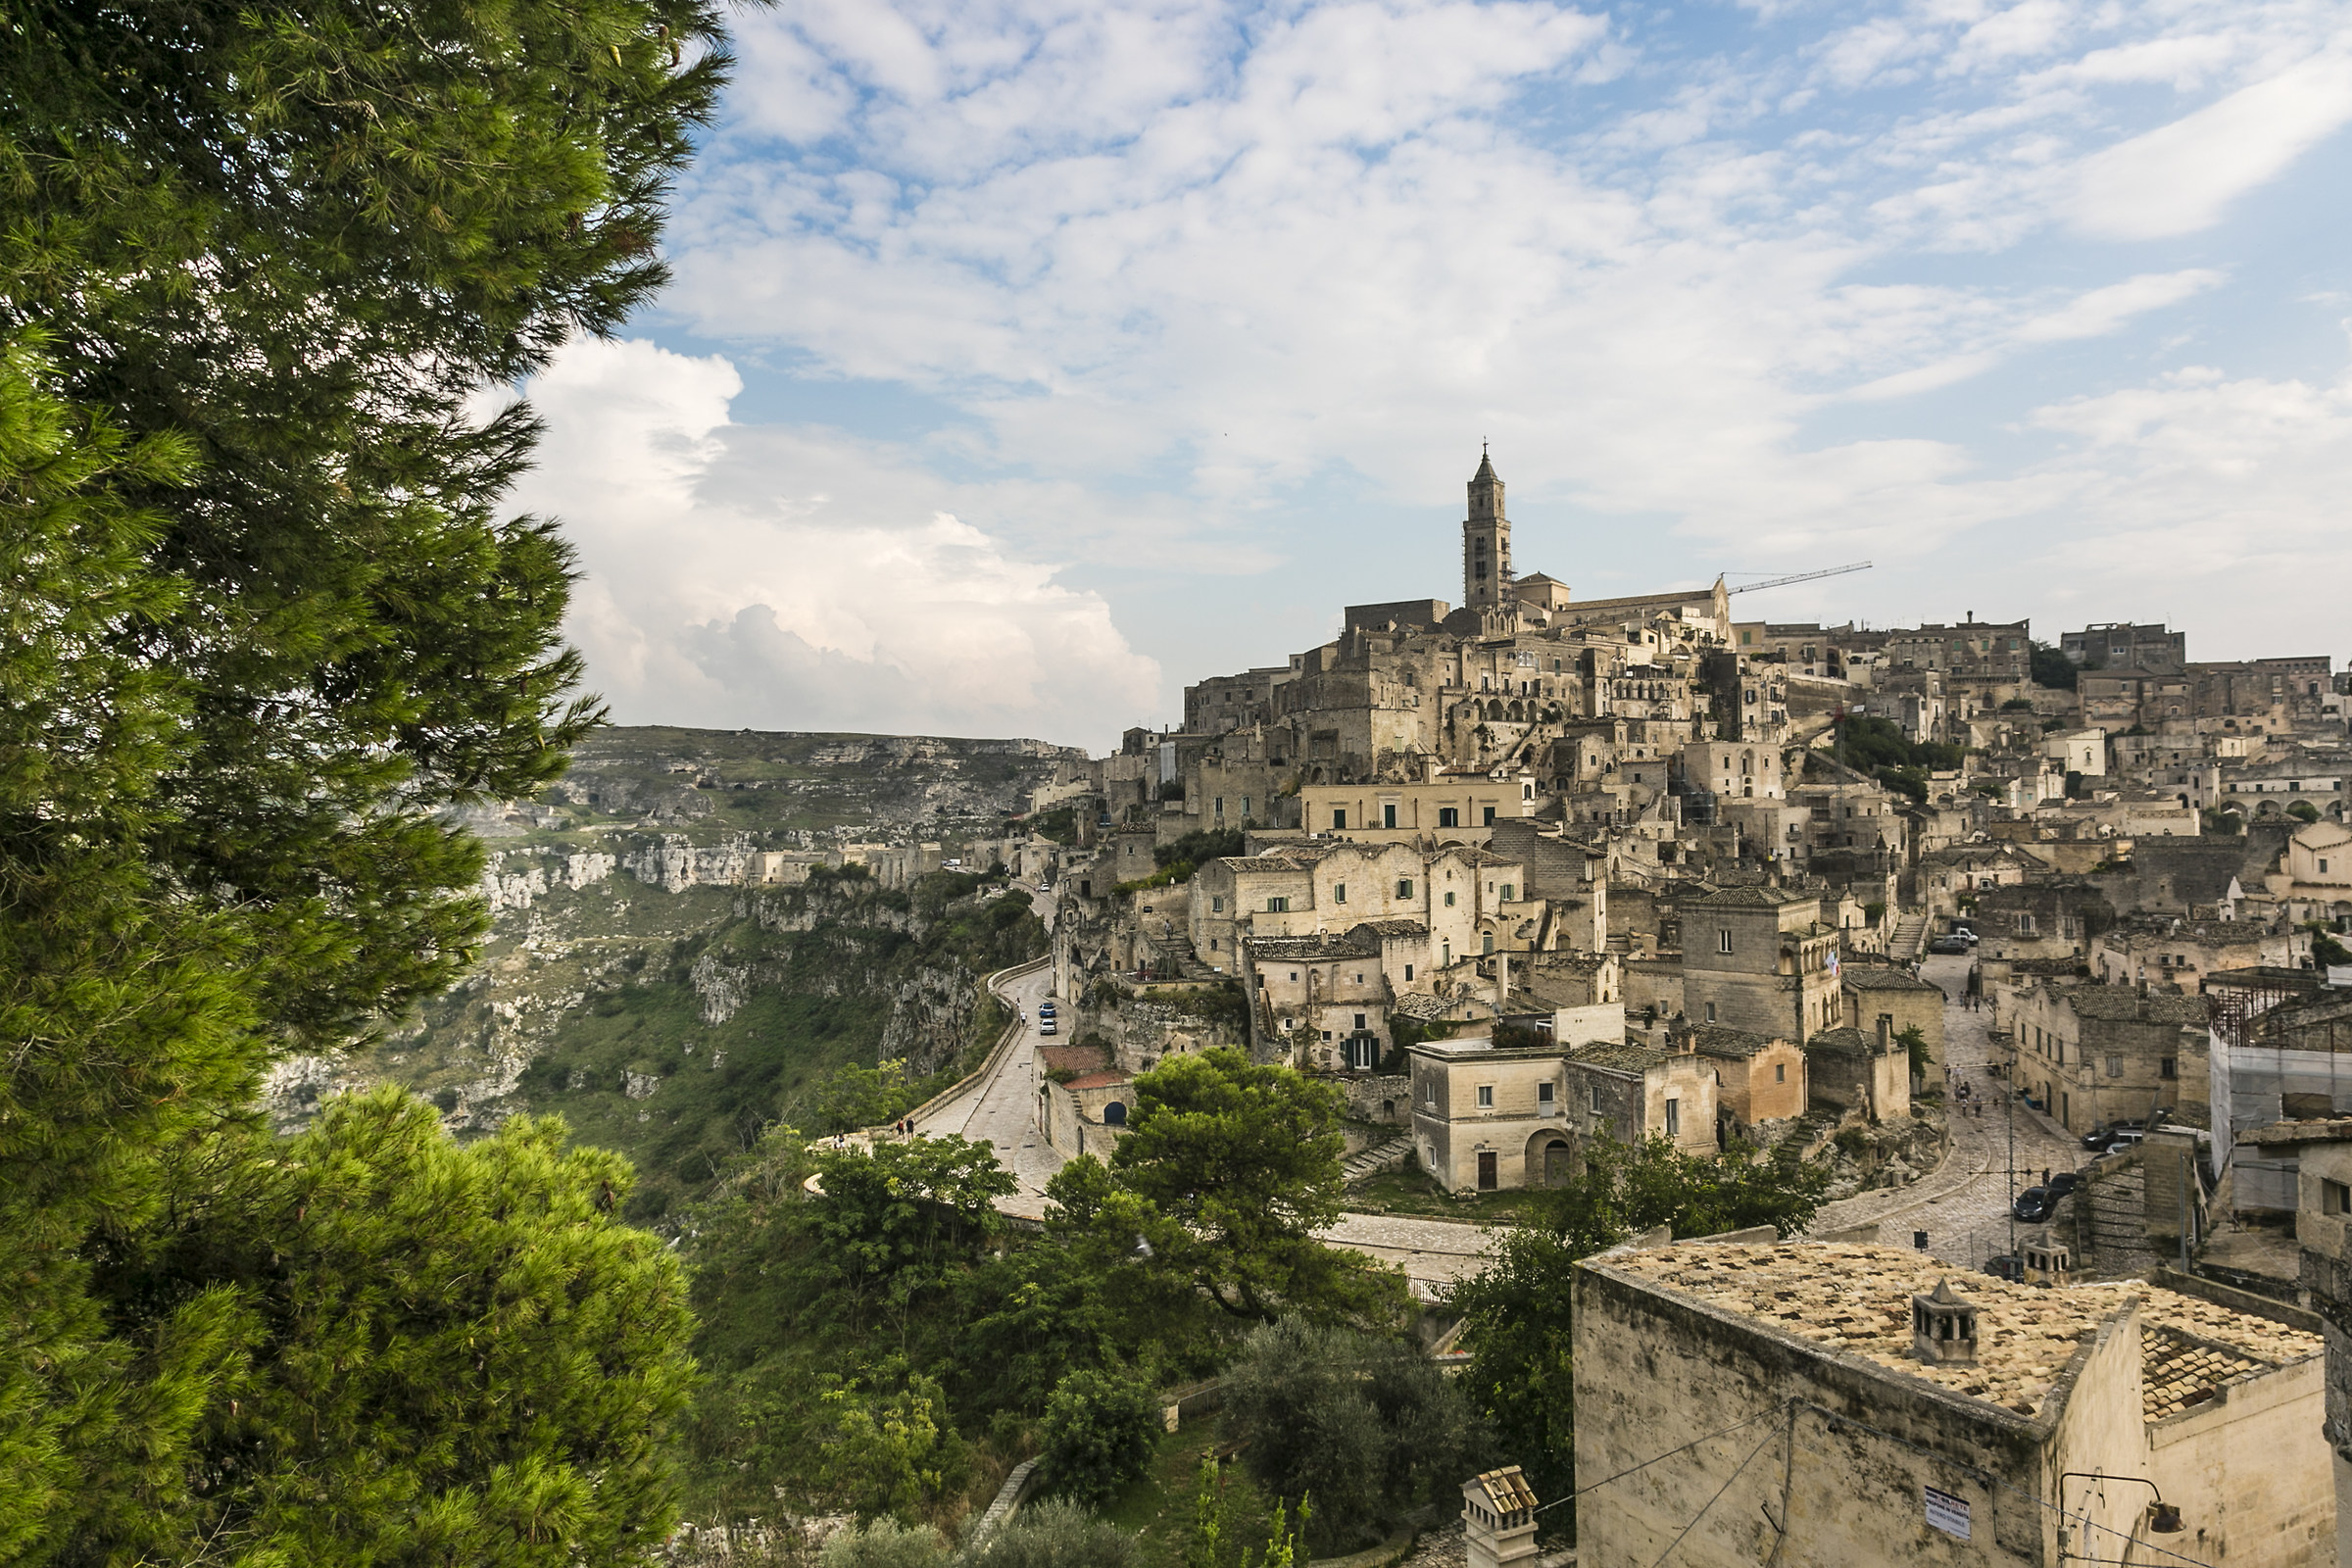 Behind the hill, here is Matera...